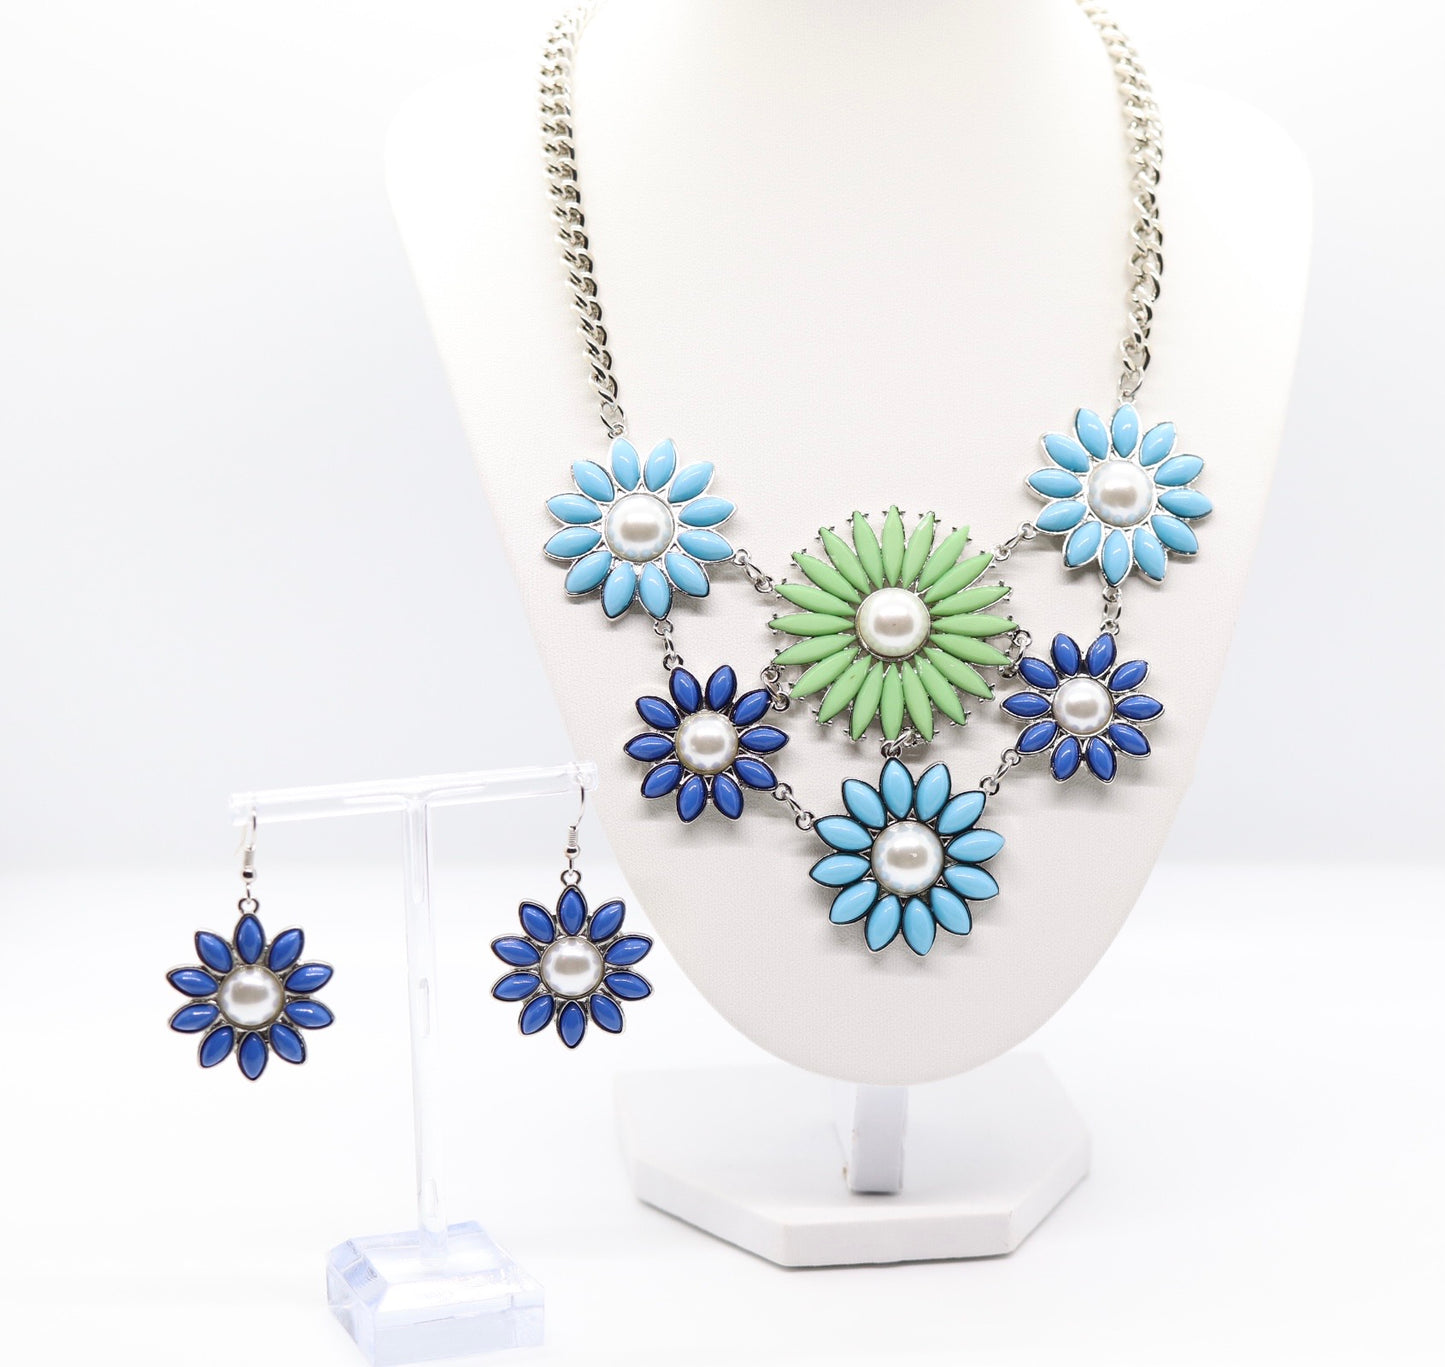 Light Blue, Blue and Green Flower Necklace With Matching Earrings